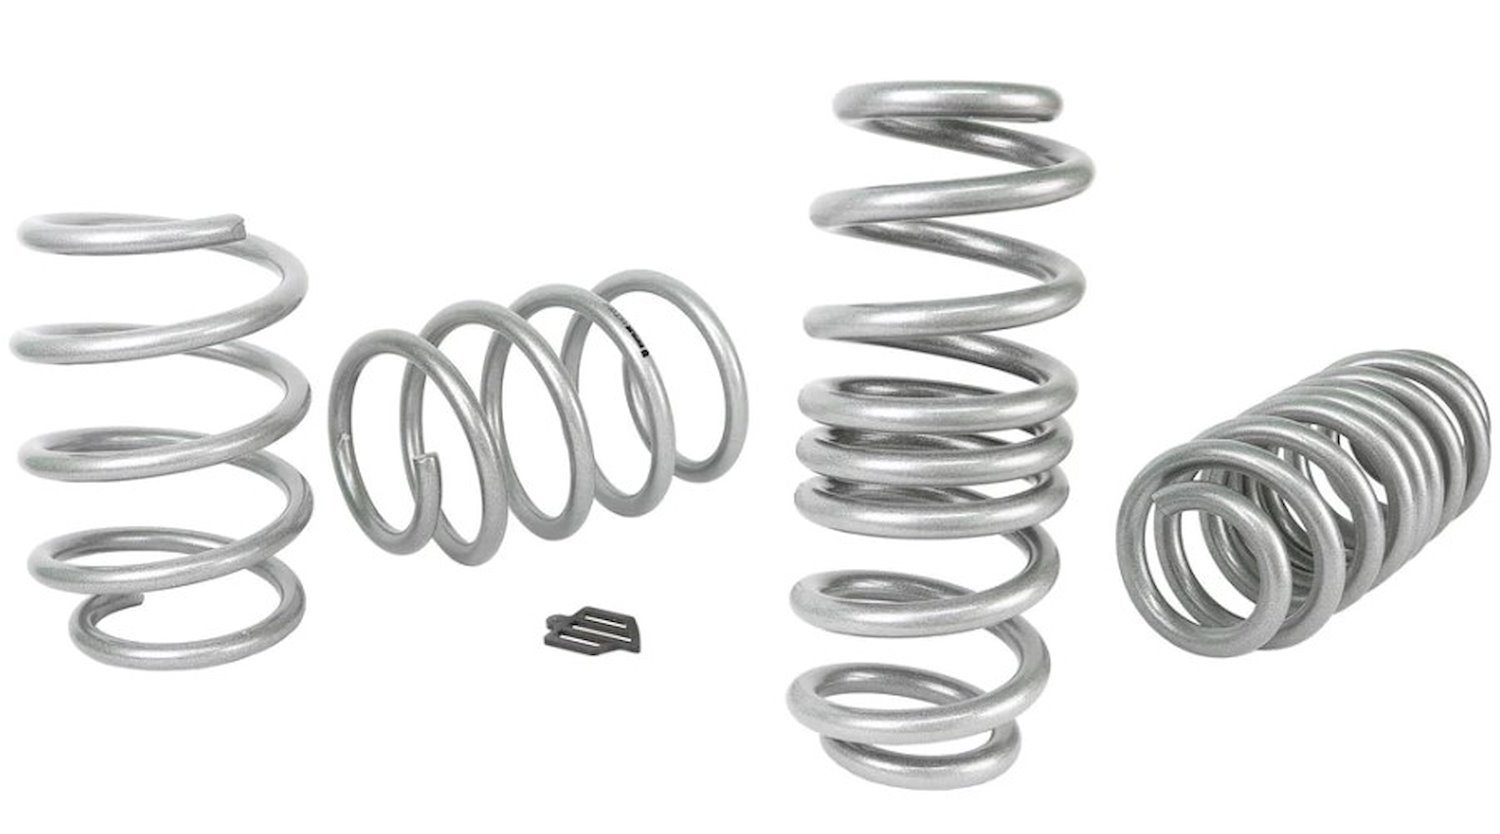 WSK-AUD001 Performance Lowering Springs for 2015-2020 Audi S3, RS3